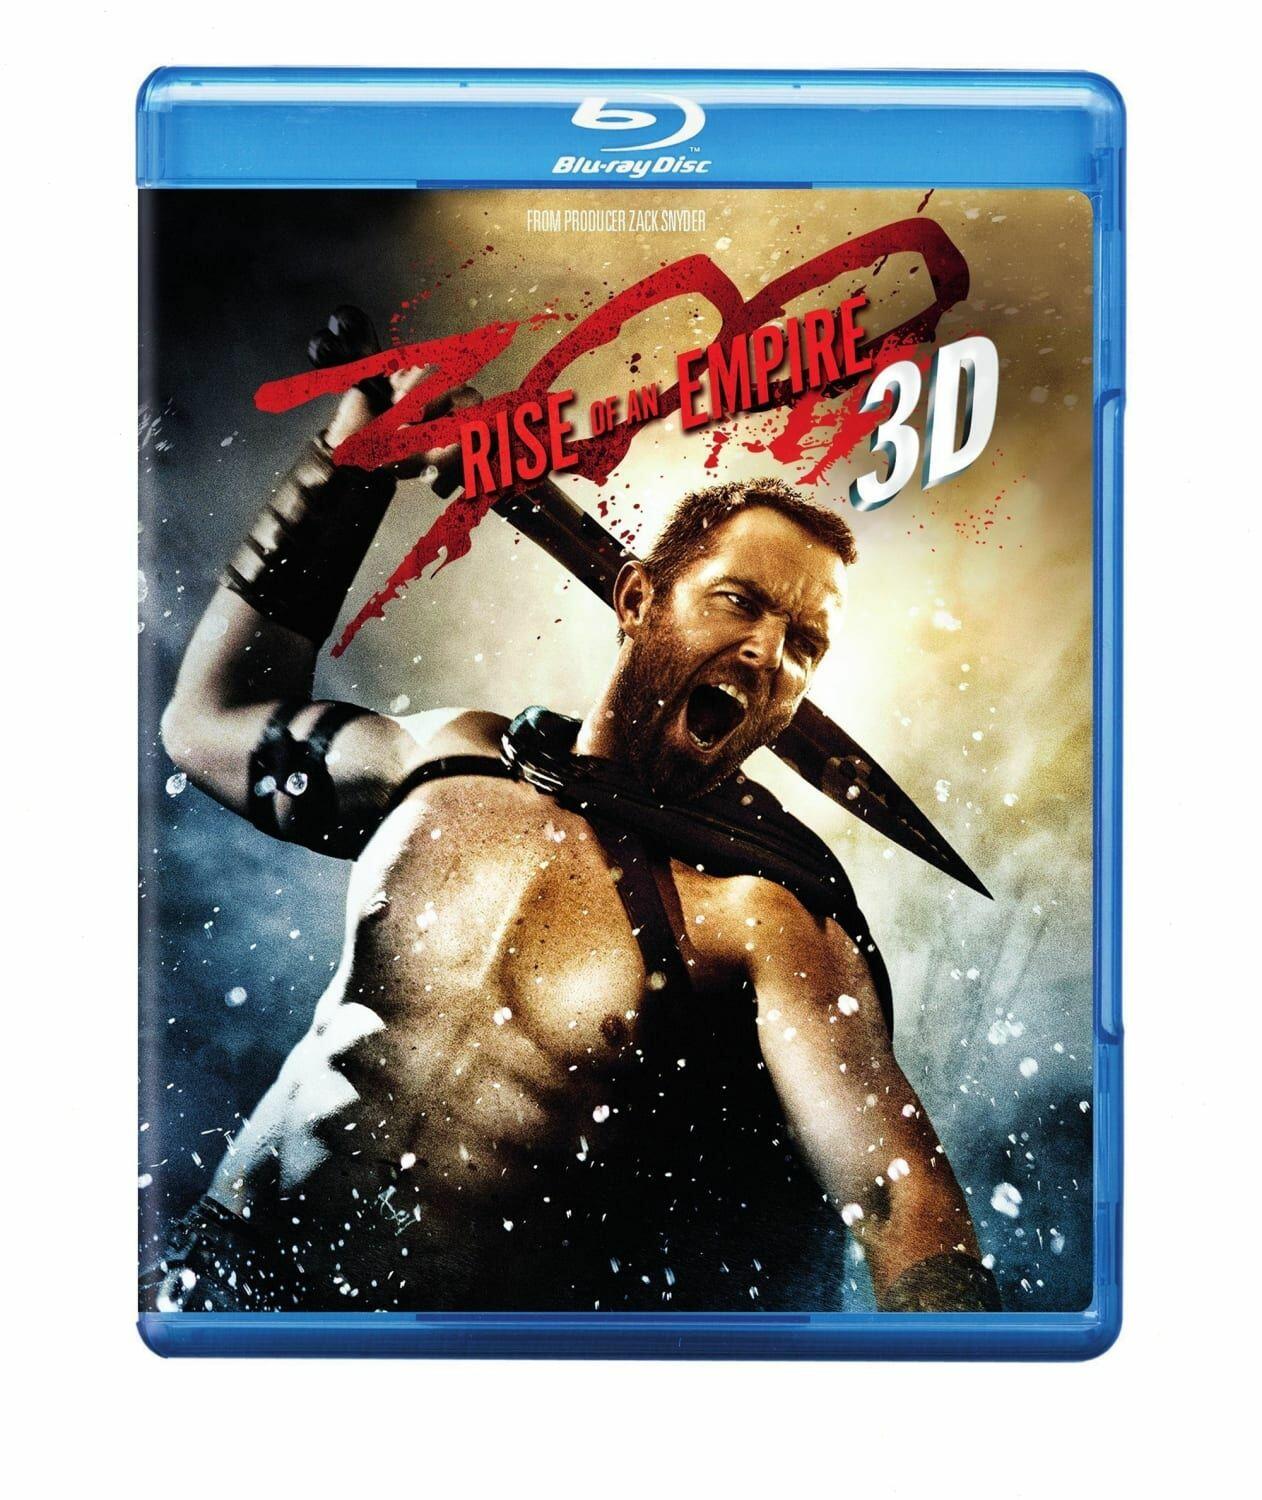 300: Rise Of An Empire (Blu-ray)